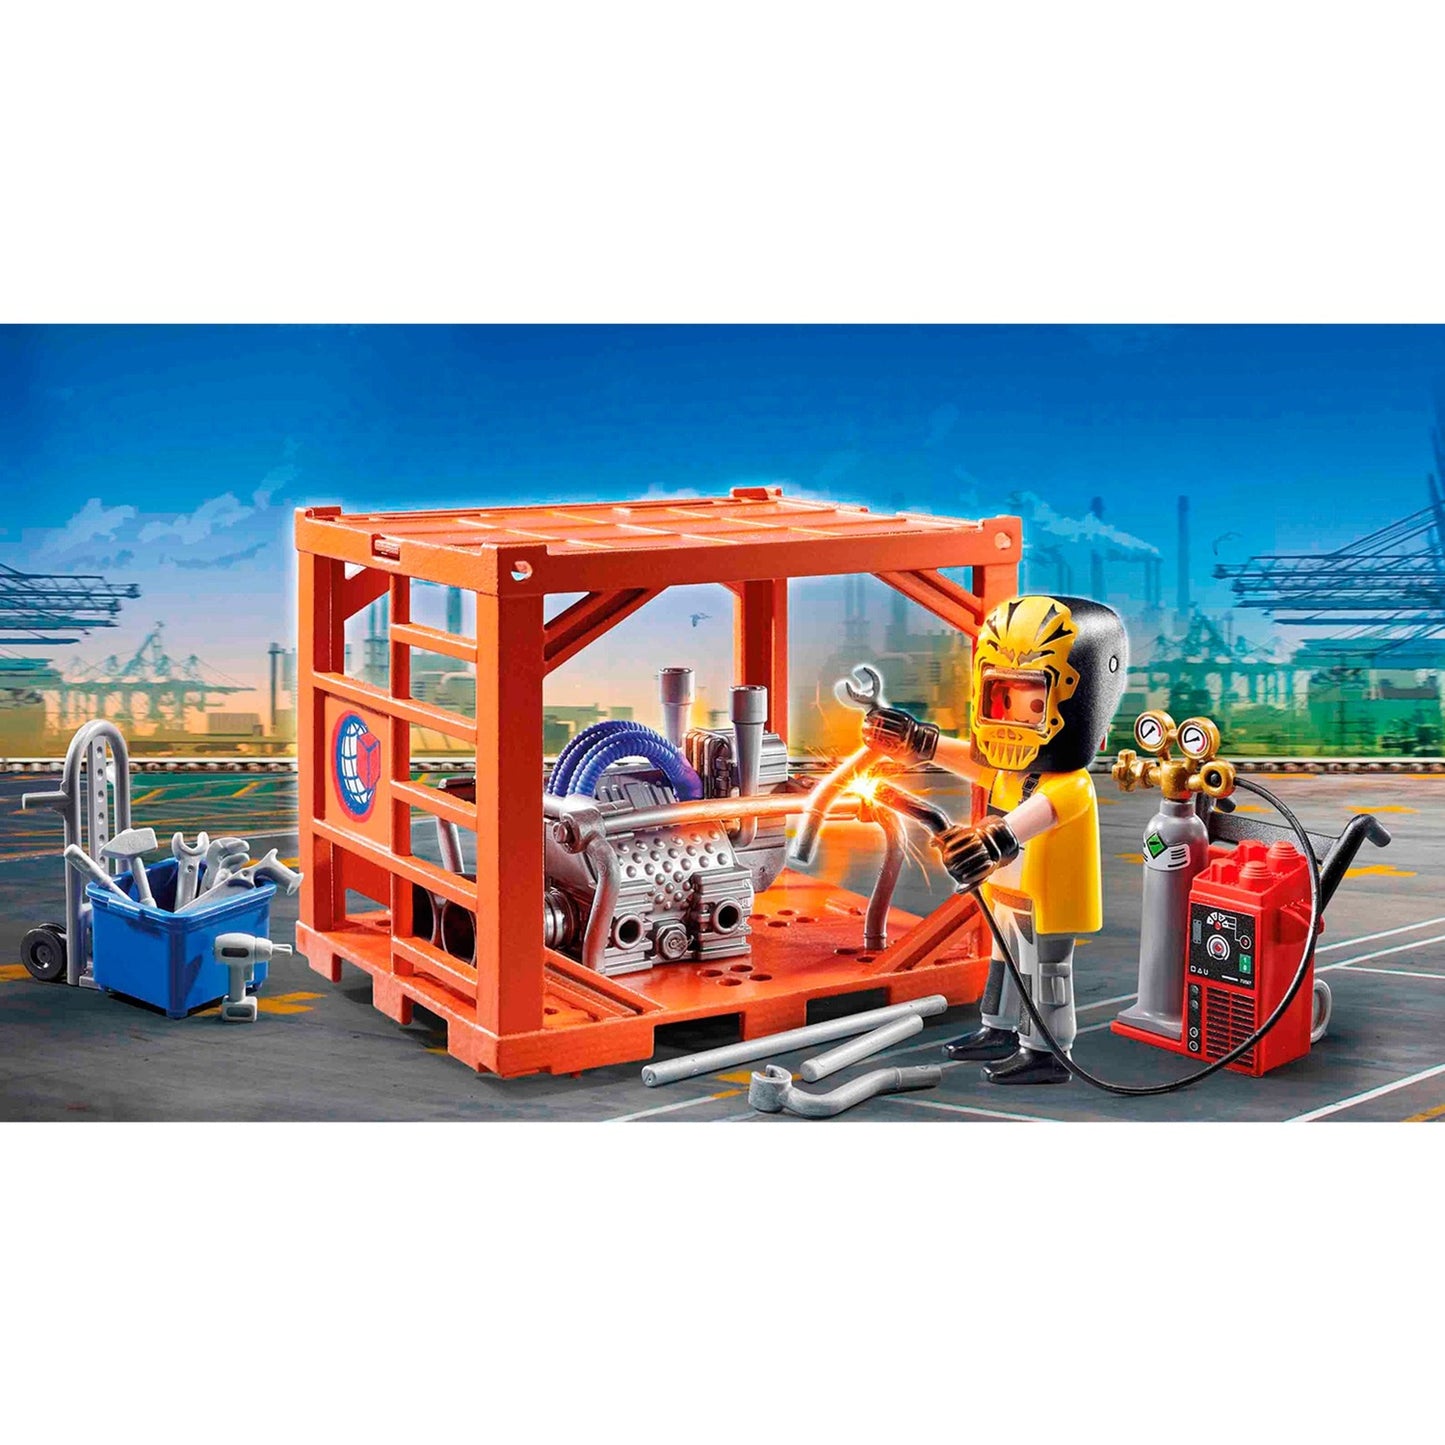 Playmobil City Action Container Production